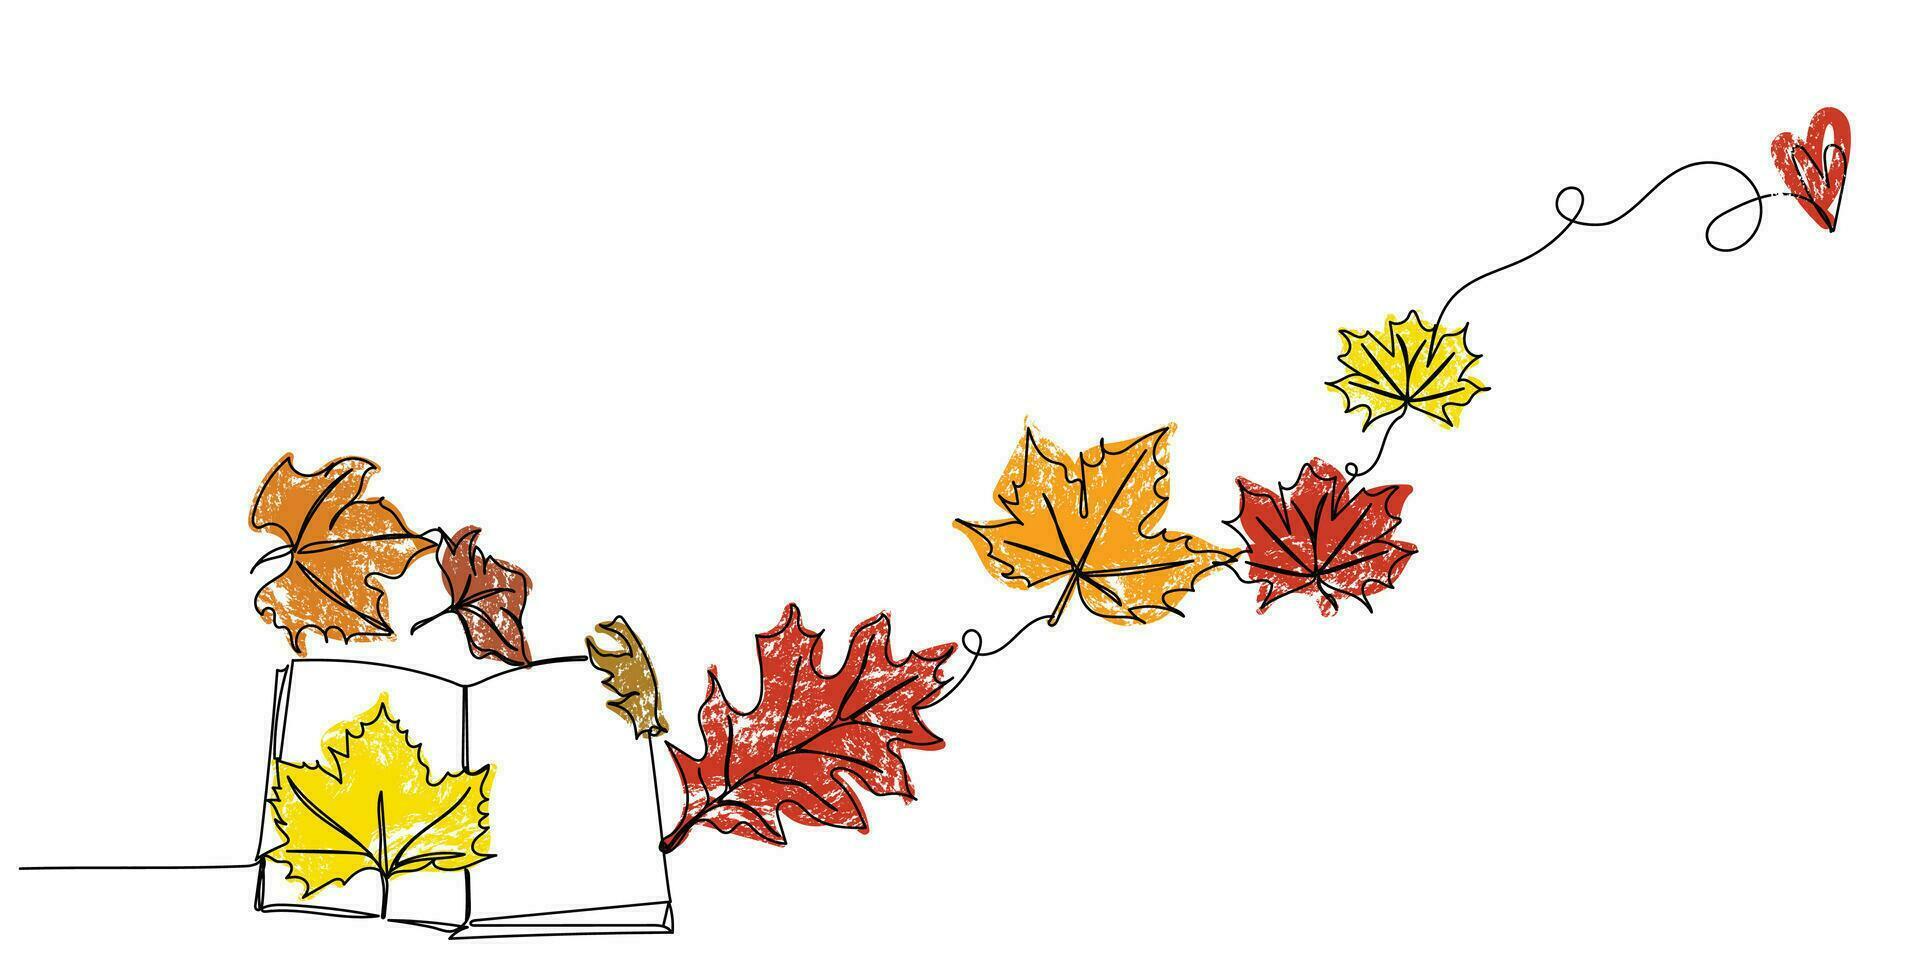 Maple leaf. Autumn leaves. Autumn forest. Fall background vector